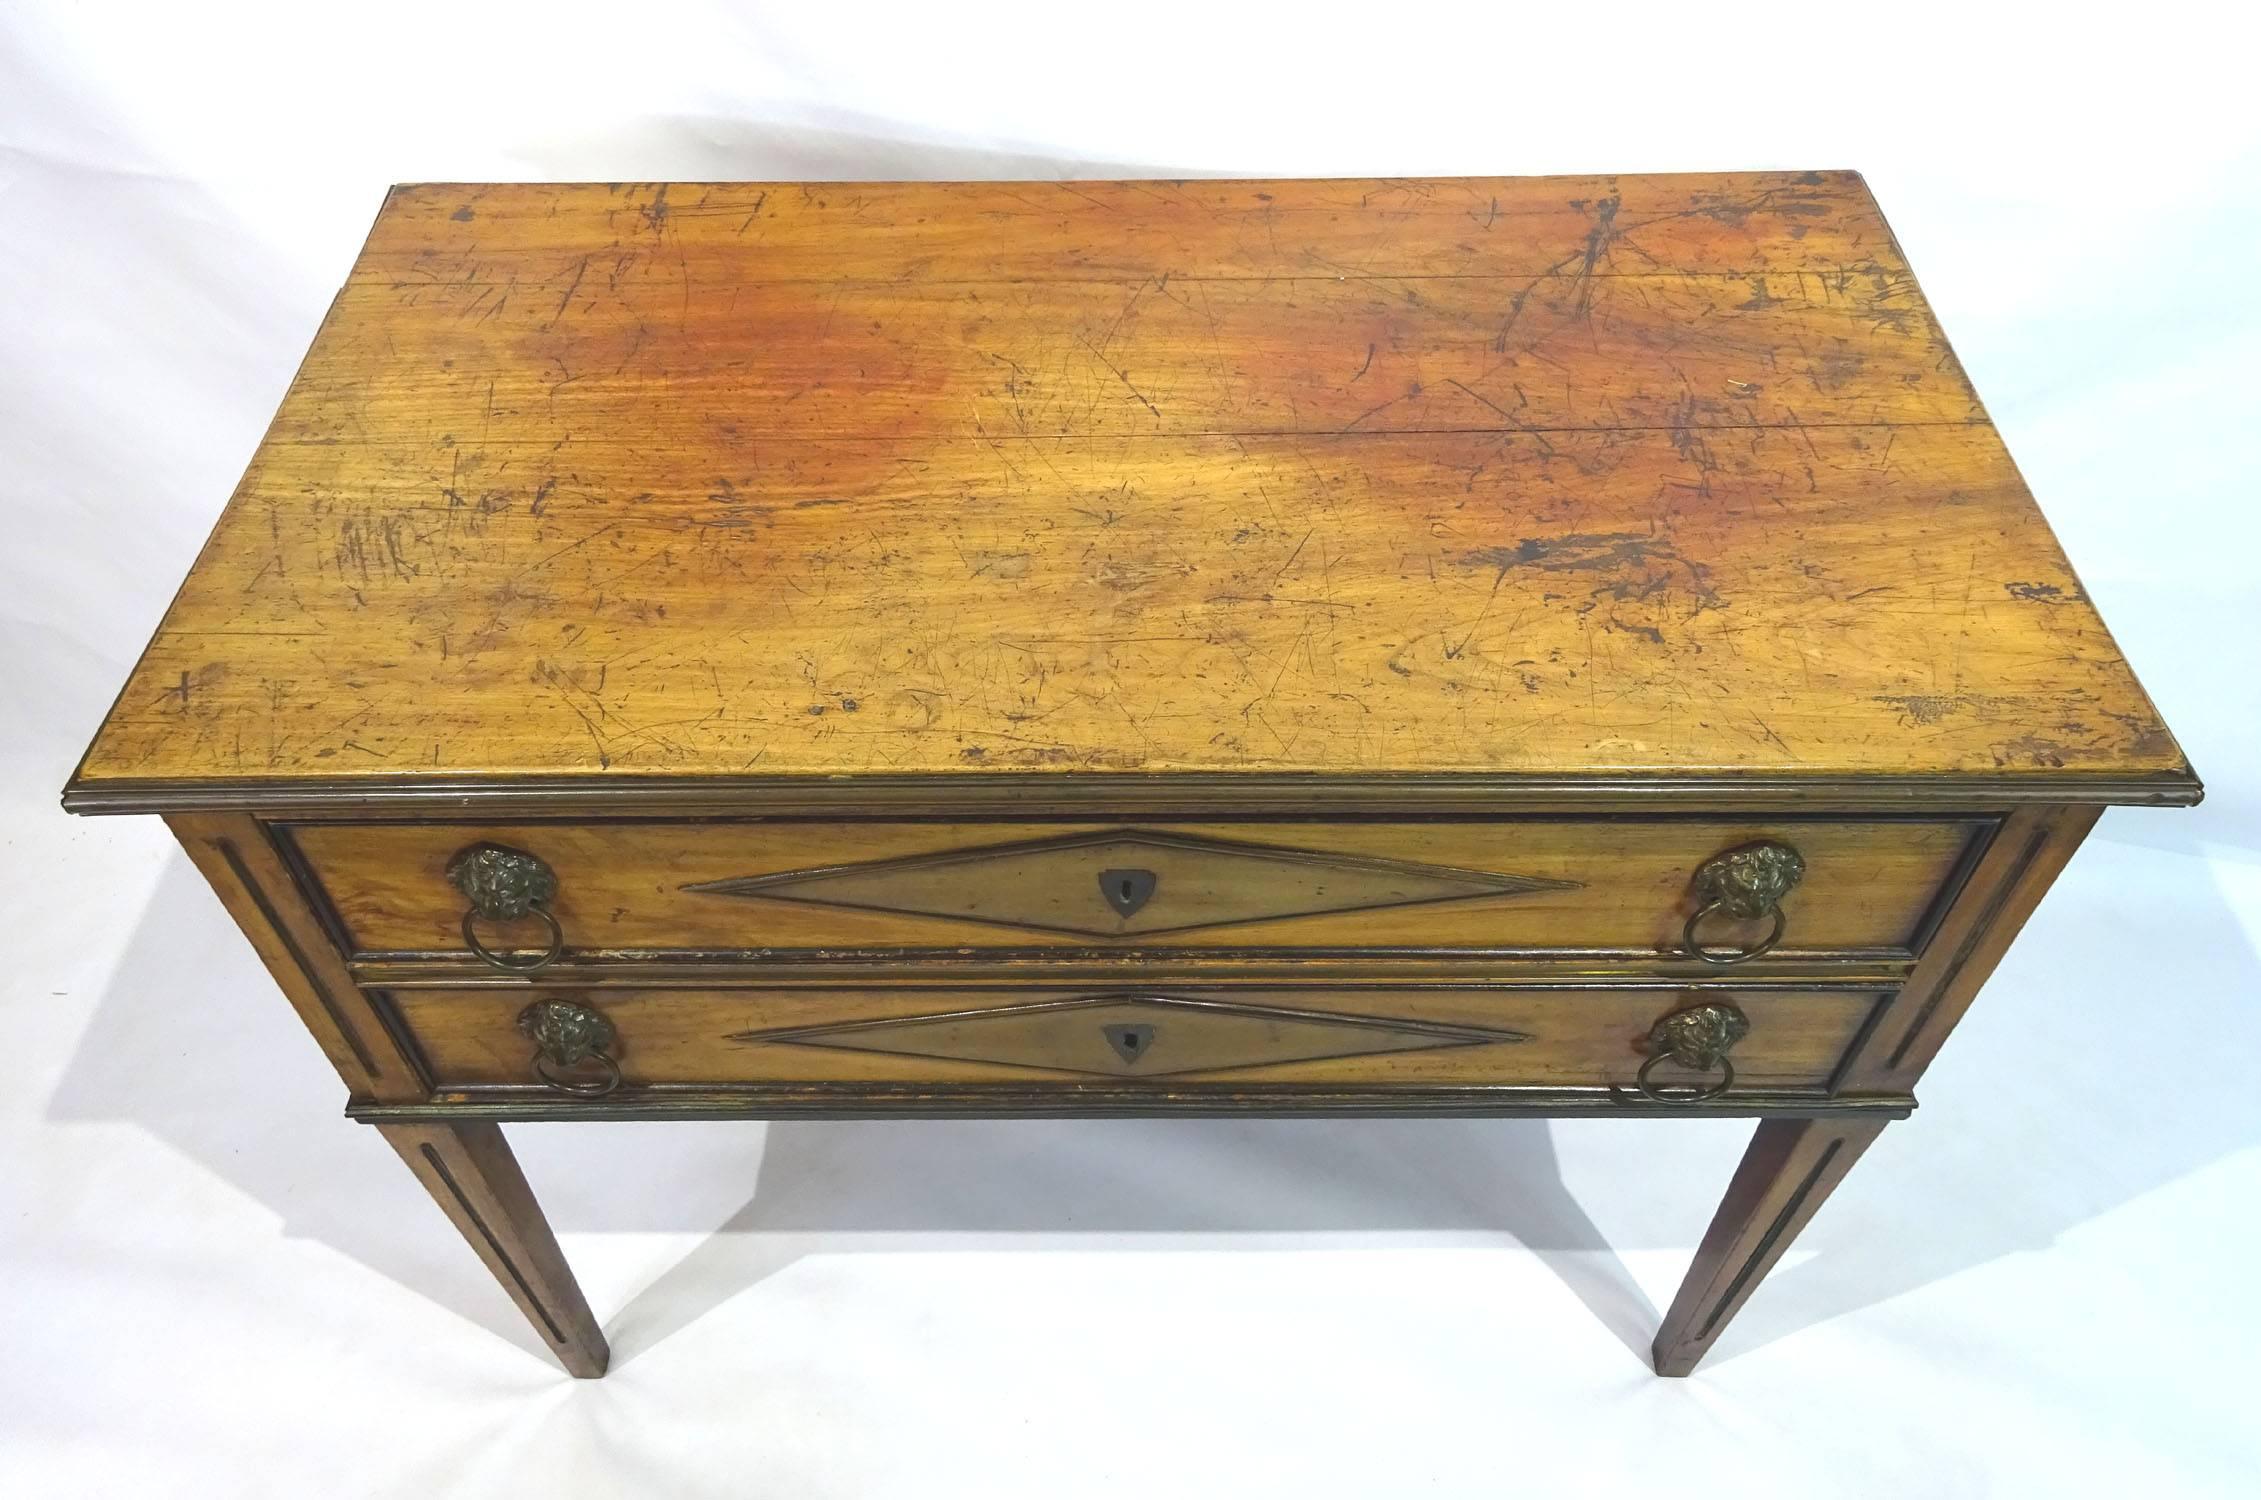 Danish birch and pearwood two-drawer chest in the Directoire style with original hardware.